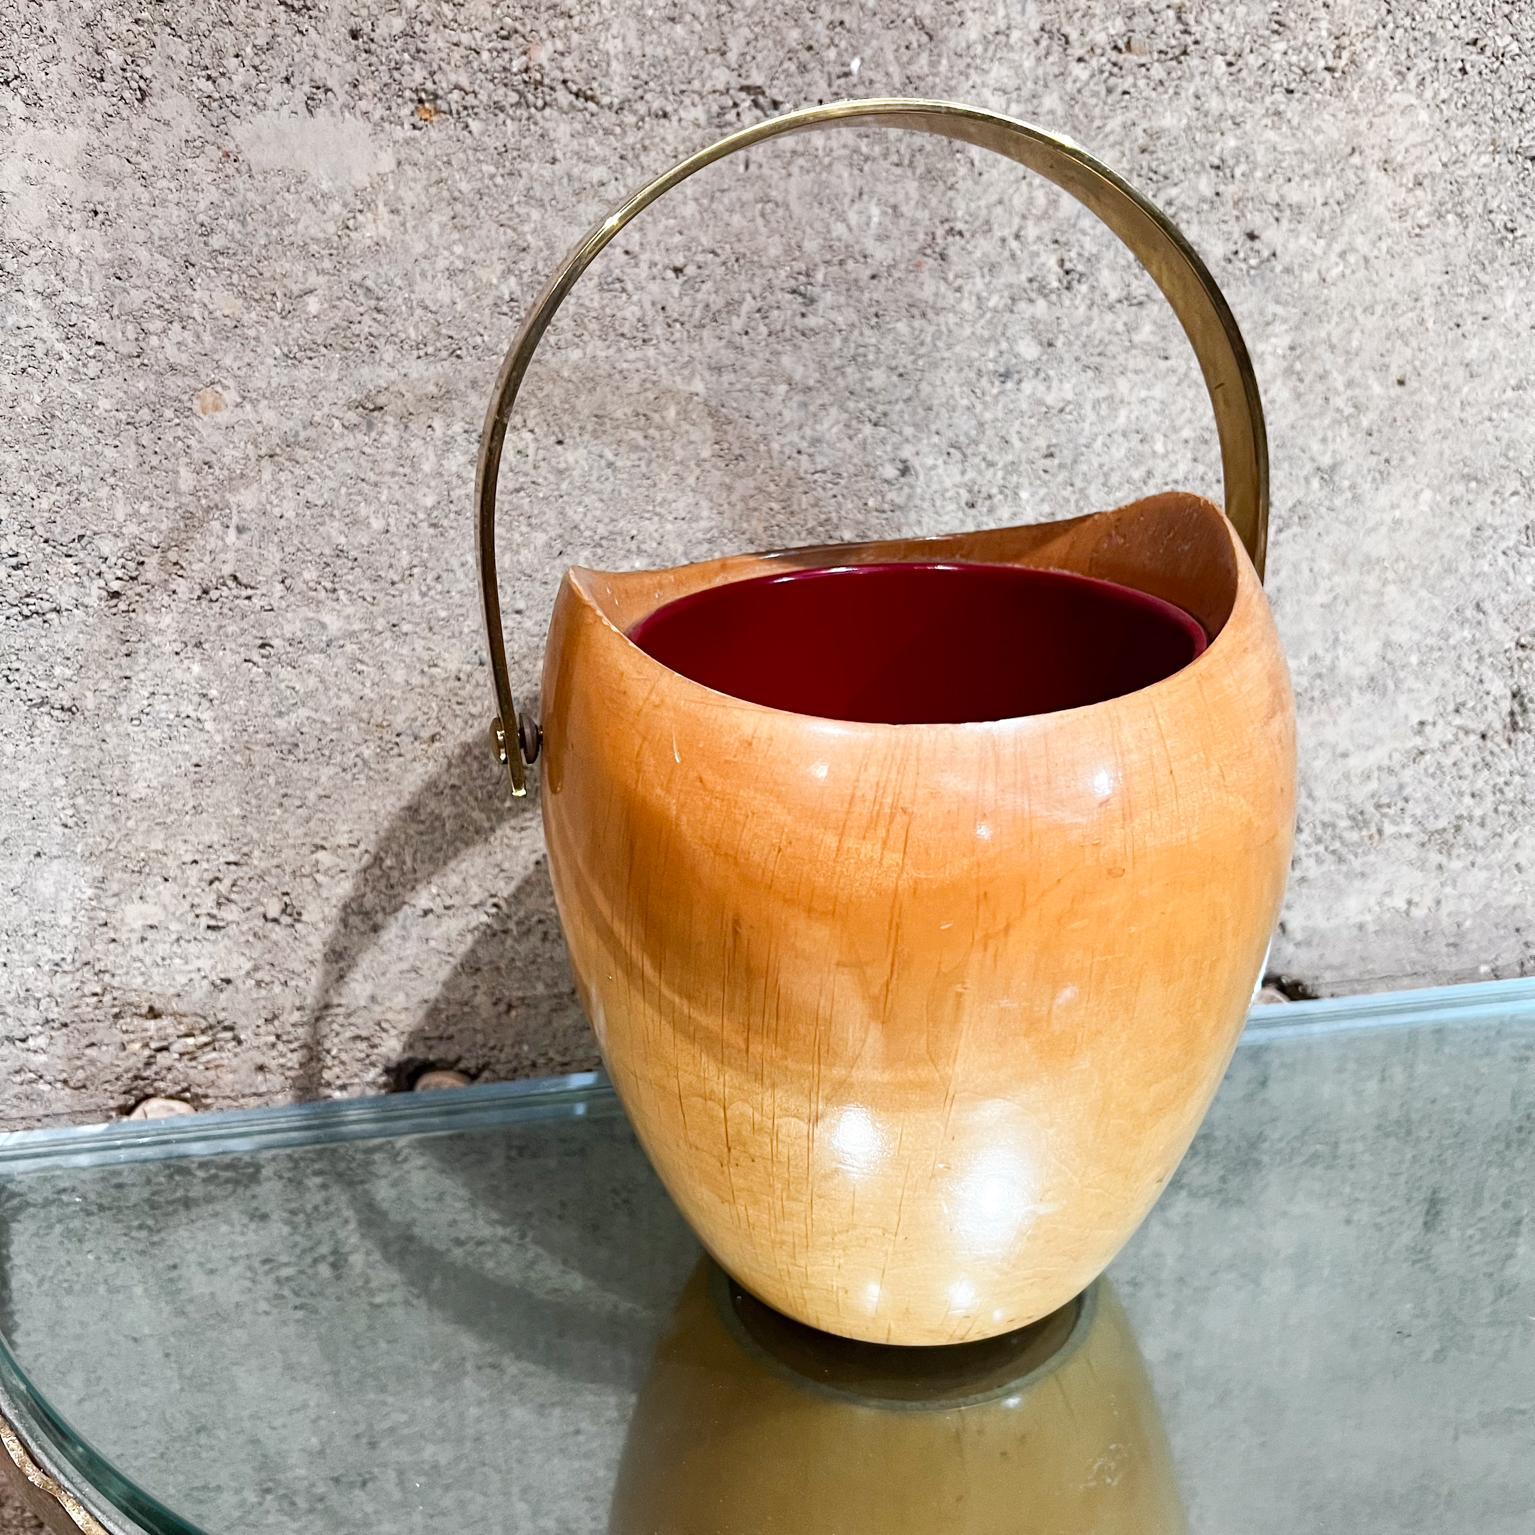 AMBIANIC presents
Midcentury Modern Champagne Wine Ice bucket by Aldo Tura. Clean modern lines
Goatskin has original lacquer finish.
Unrestored vintage condition.
Label present from the maker.
Made in Italy circa 1960s.
15.5 H x 8 in diameter, 19.5